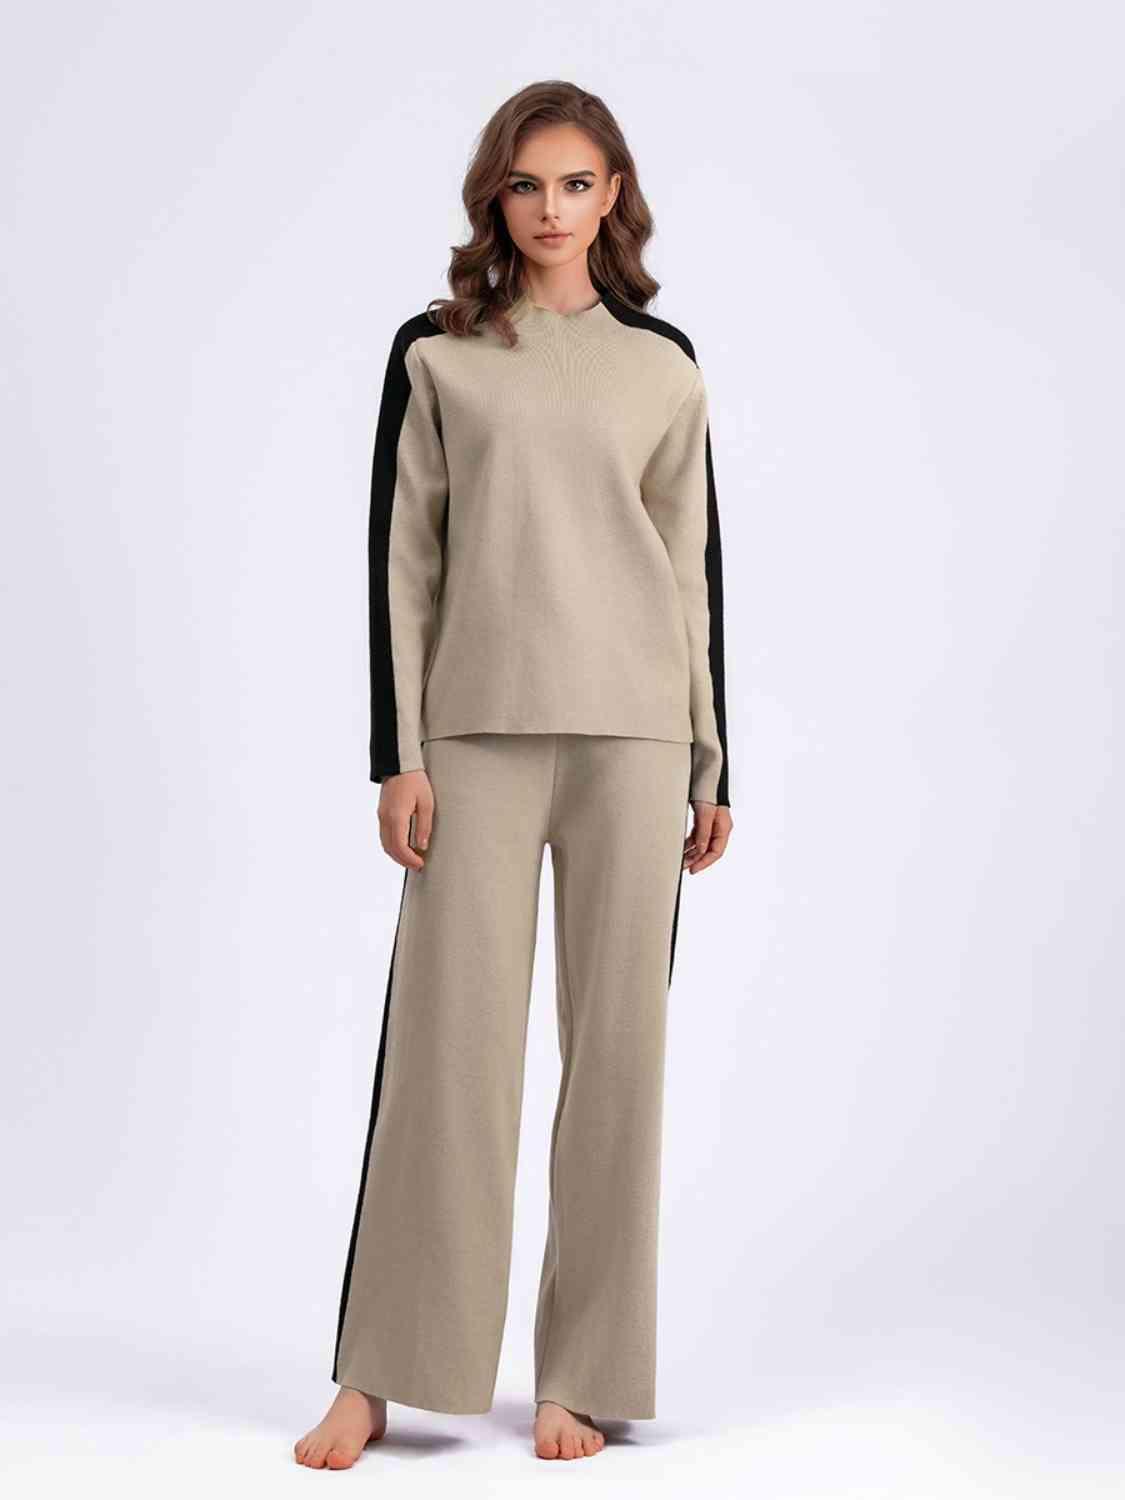 Cold Weather Outfit Matching Sweater and Pants Set-MXSTUDIO.COM